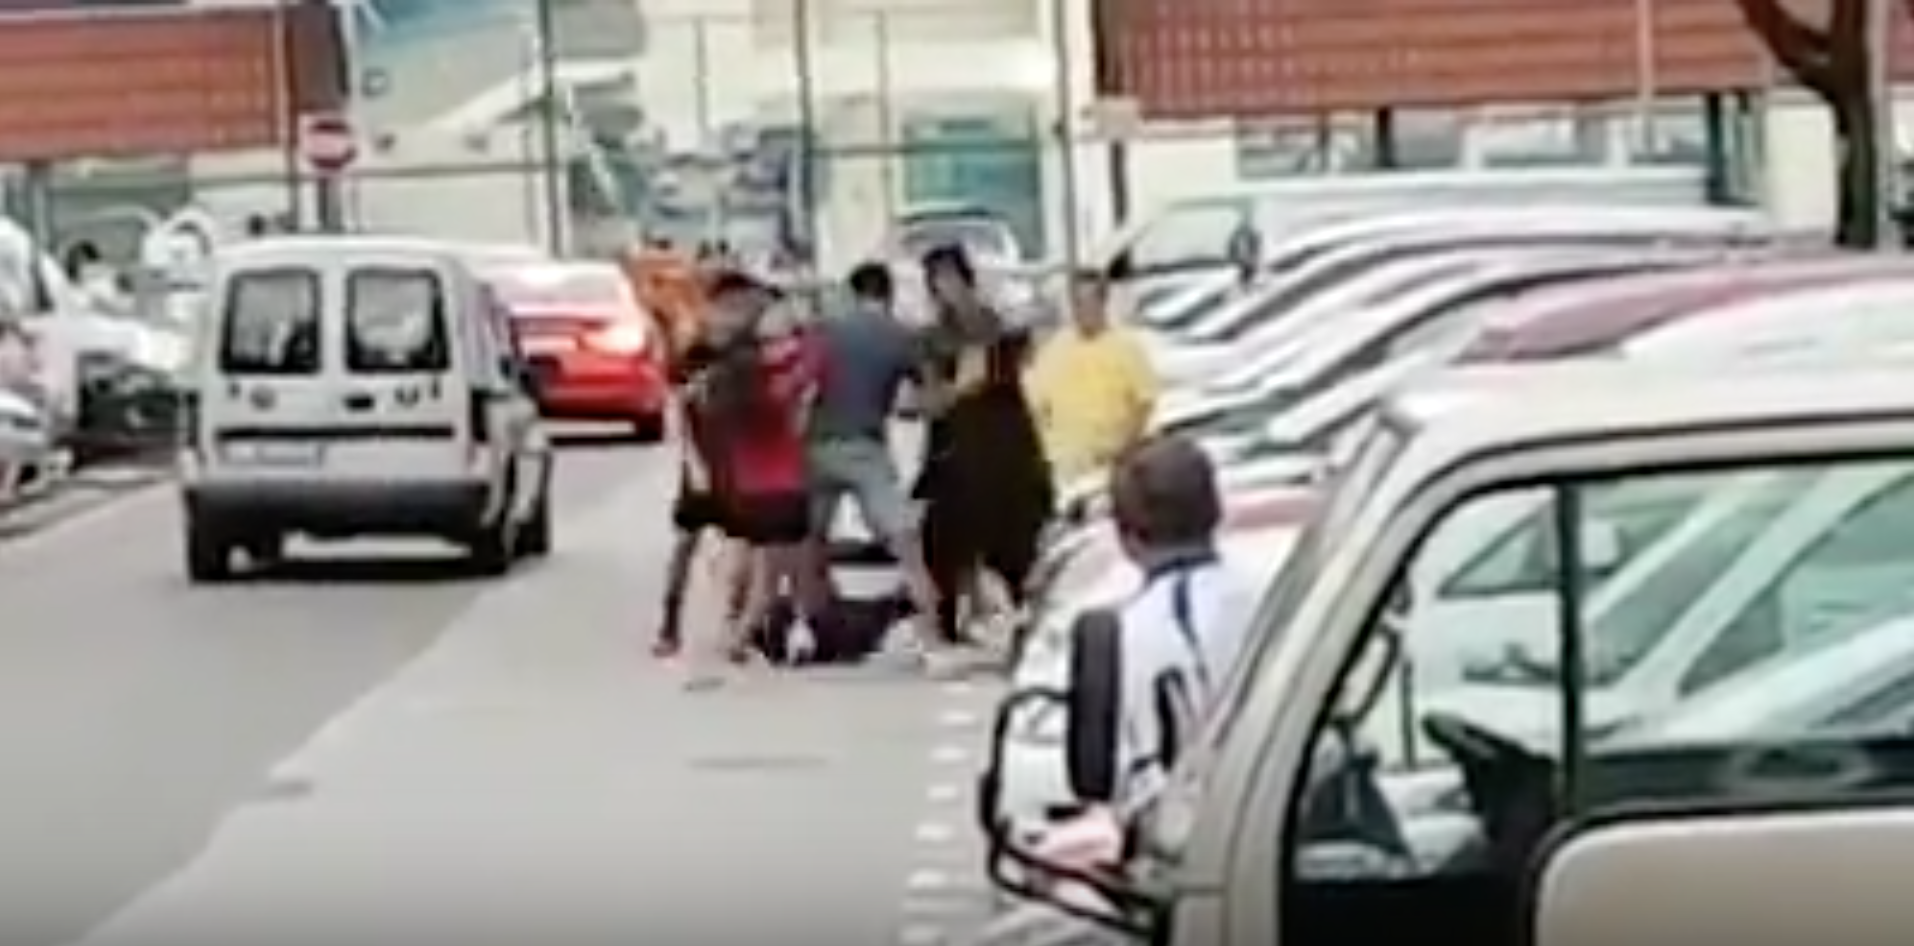 Fierce siol! Hougang 十三妹 vs a group of men in broad daylight gang fight! 